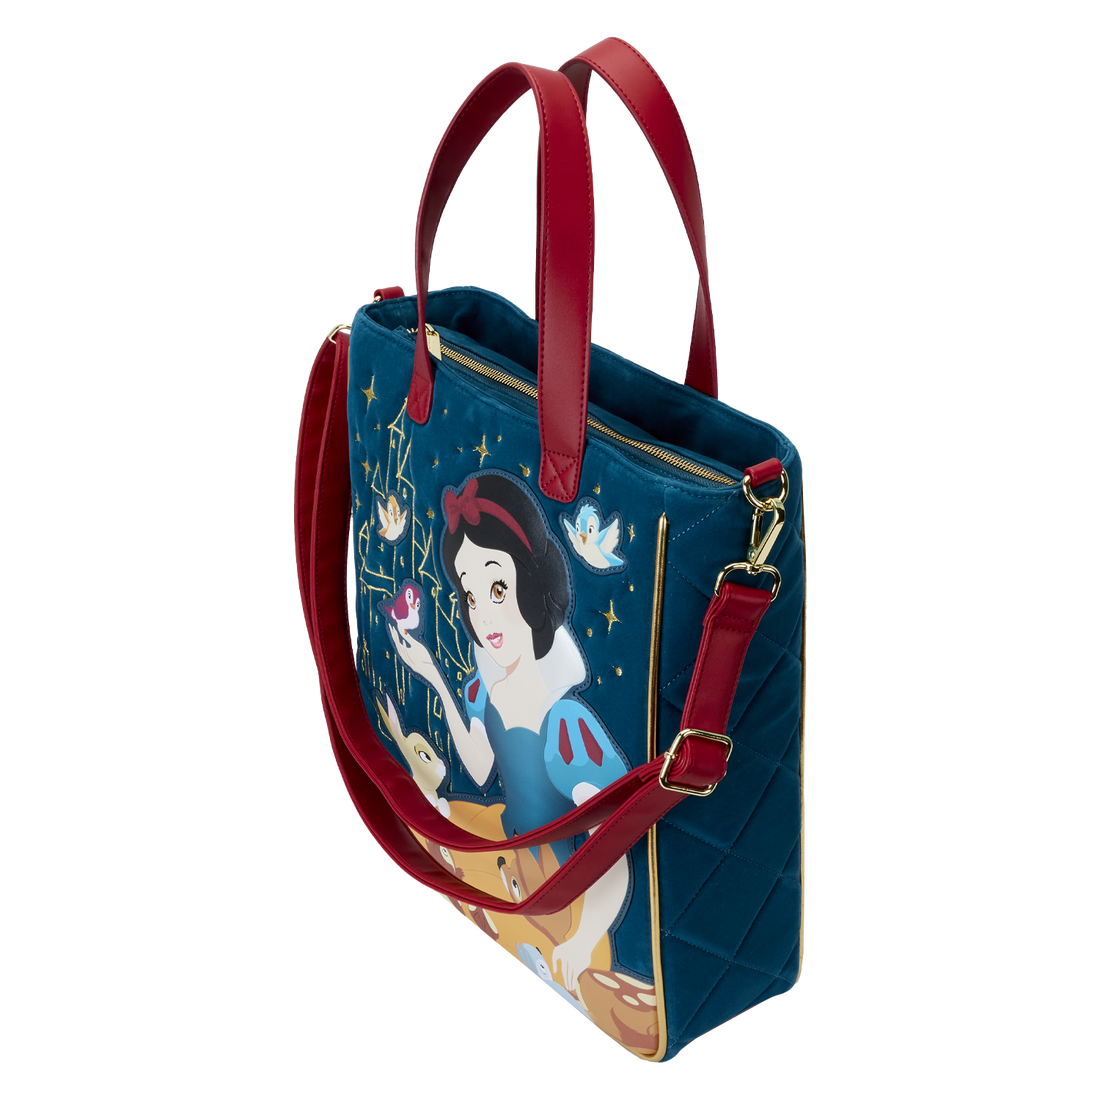 Loungefly Snow White Heritage Quilted Velvet Tote Bag